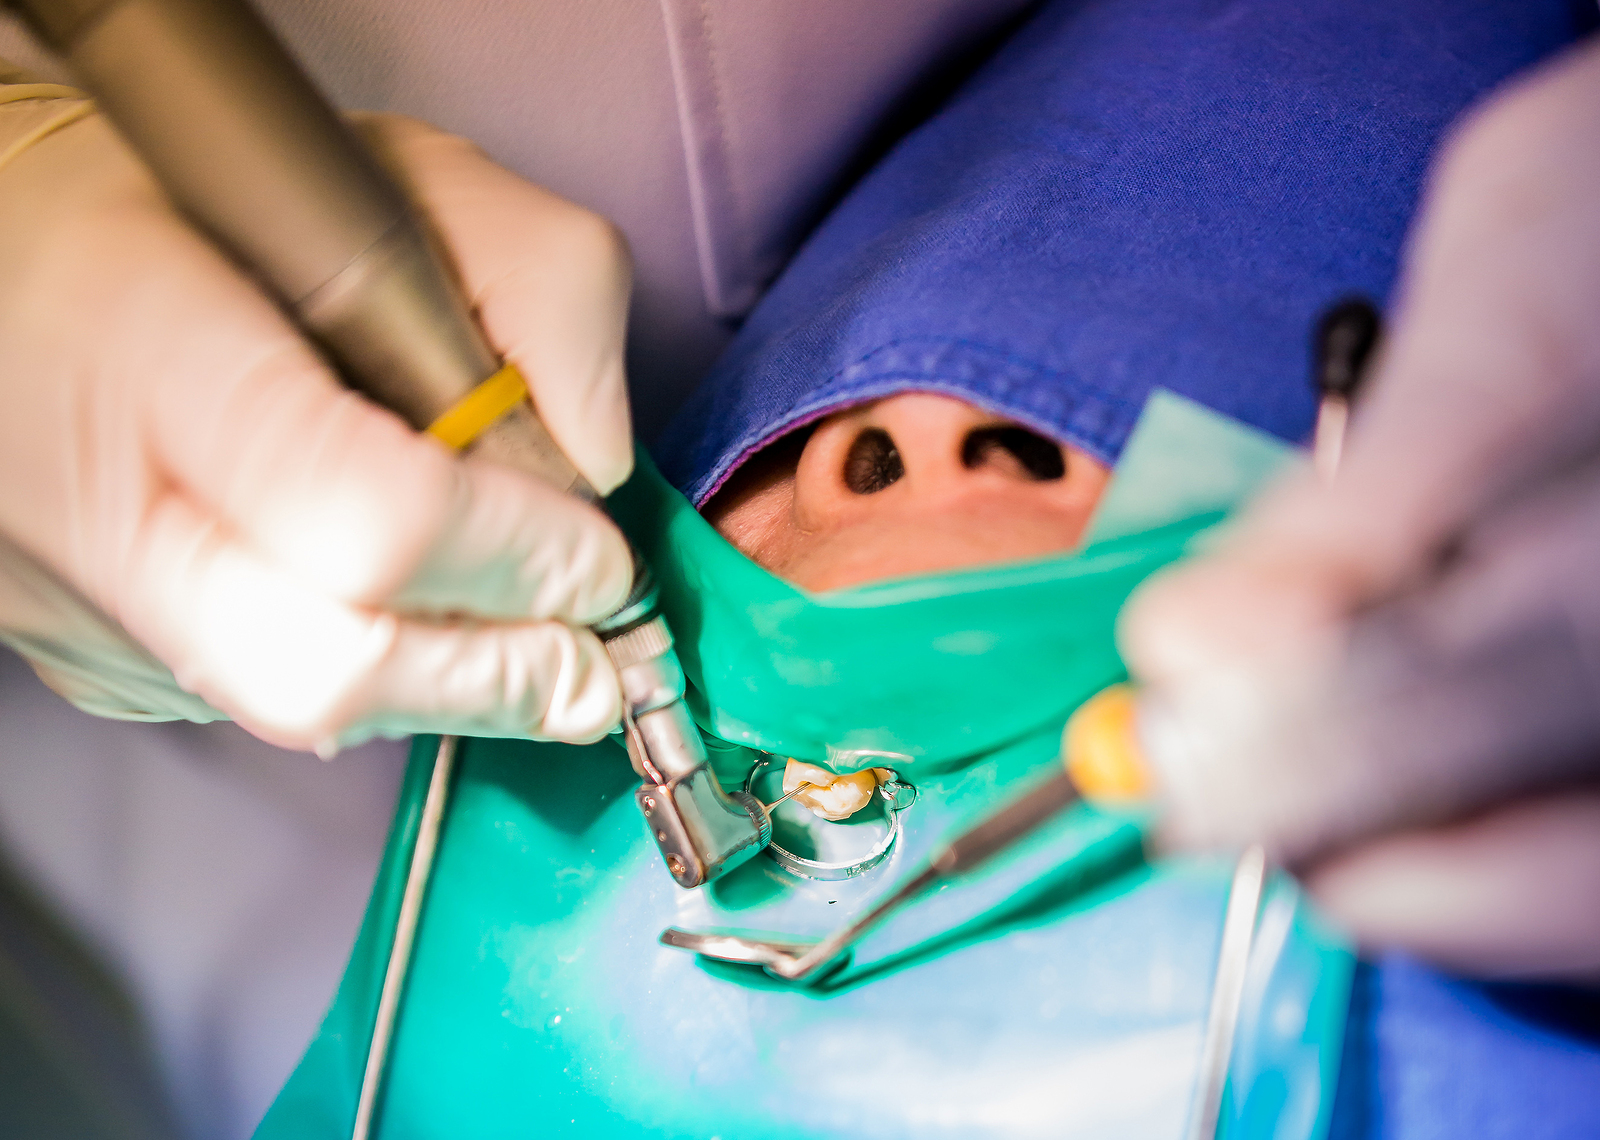 All you need to know about root canal treatment